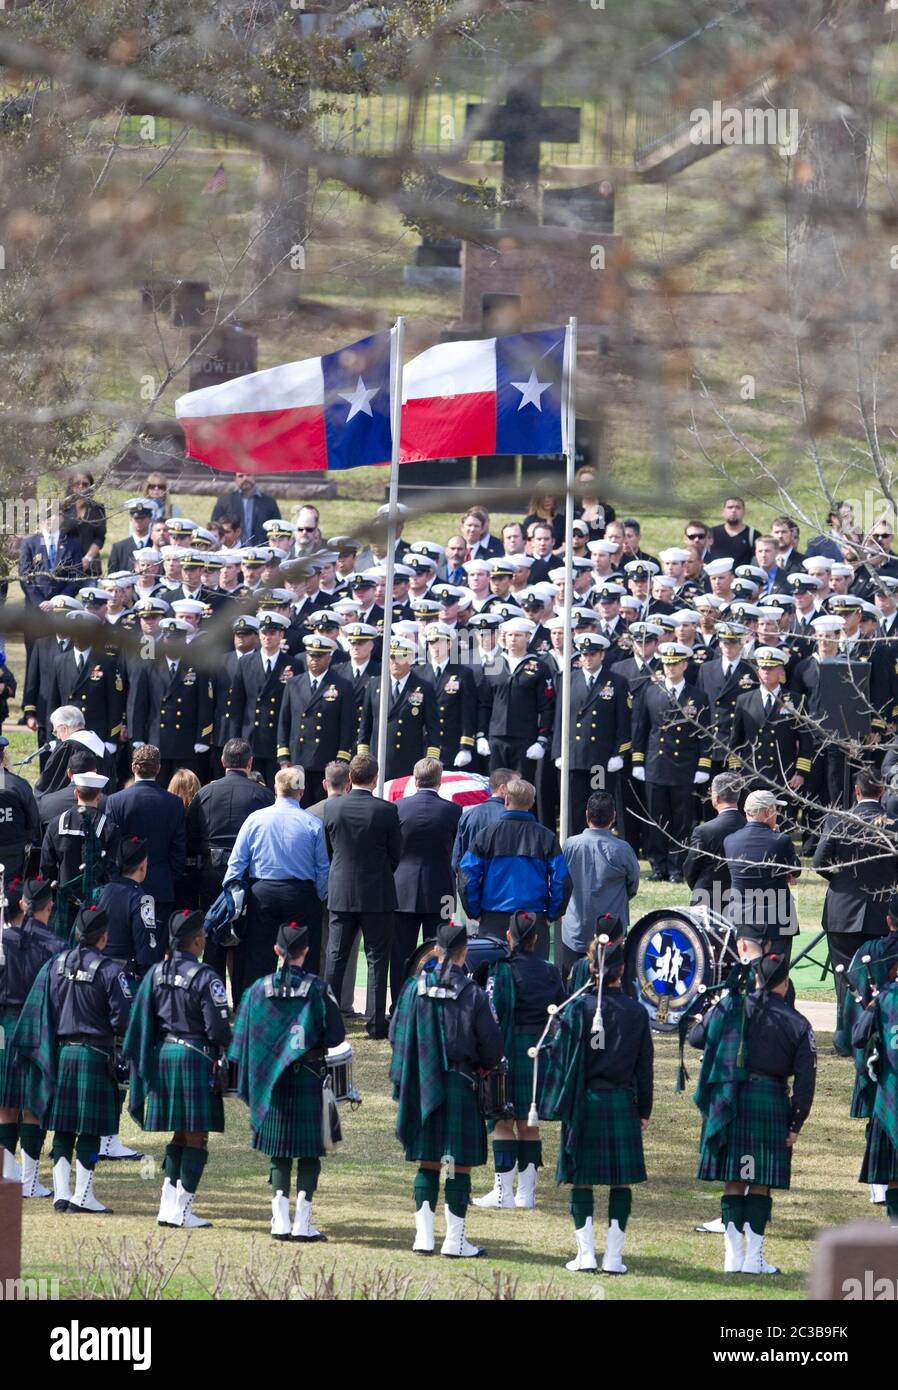 Austin Texas USA, February 12, 2013: Two Texas state flags fly over the flag-draped coffin of former Navy SEAL Chris Kyle during Kyle's funeral at the Texas State Cemetery. Kyle served four tours of duty as a sniper during the Iraq war, then wrote a popular book about his experiences there. He was fatally shot by a fellow Iraq war veteran at a gun range in Glen Rose, Texas on February 2. ©Marjorie Kamys Cotera/Daemmrich Photography Stock Photo